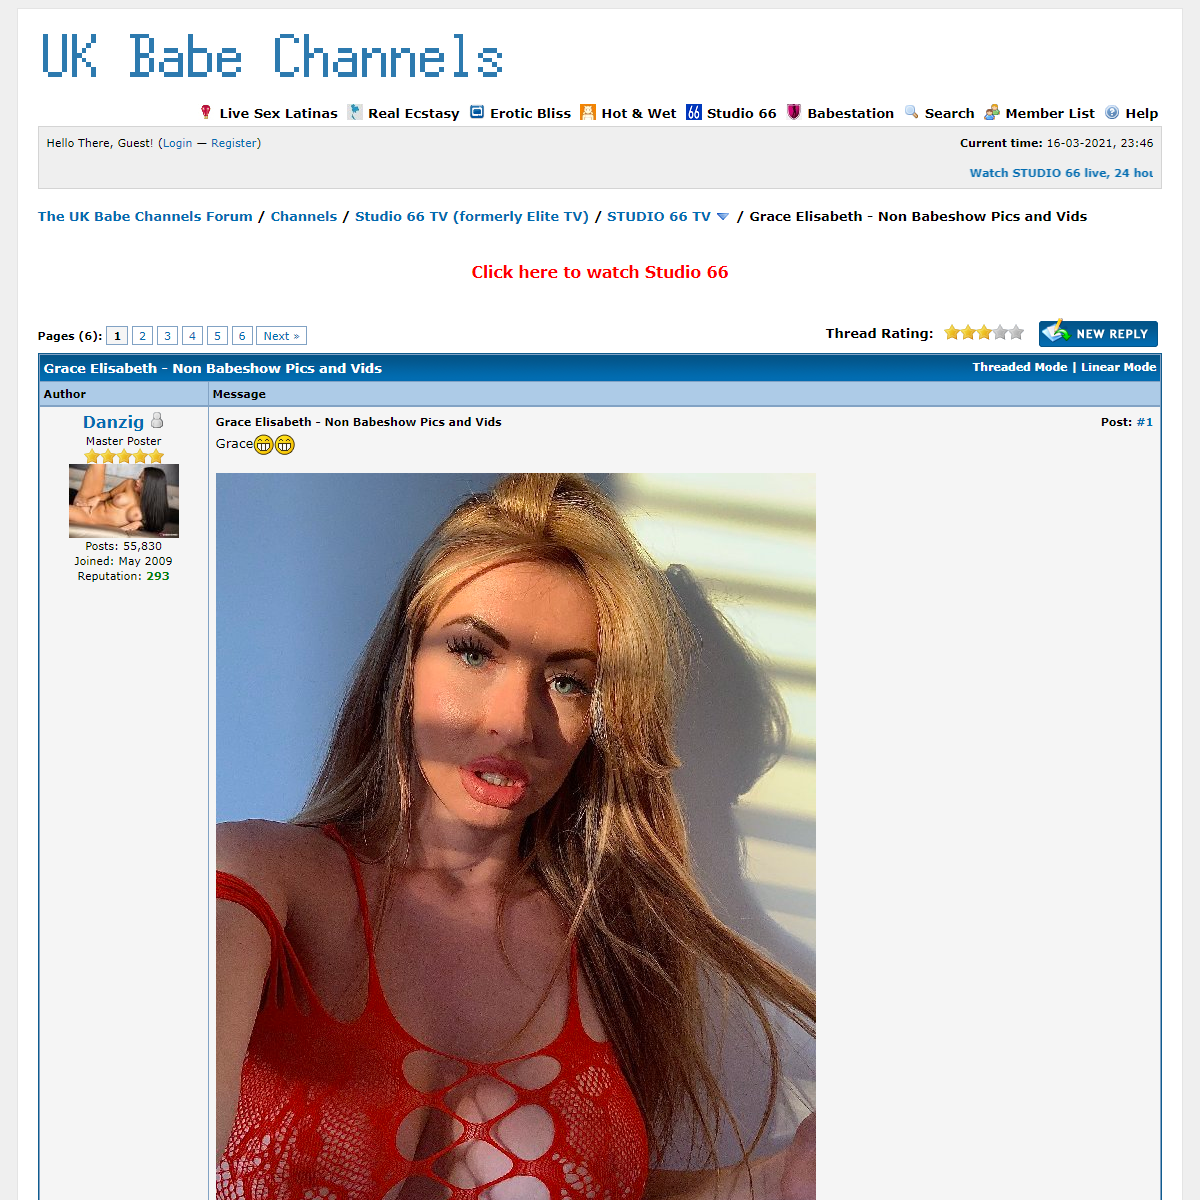 A complete backup of https://www.babeshows.co.uk/showthread.php?tid=81025